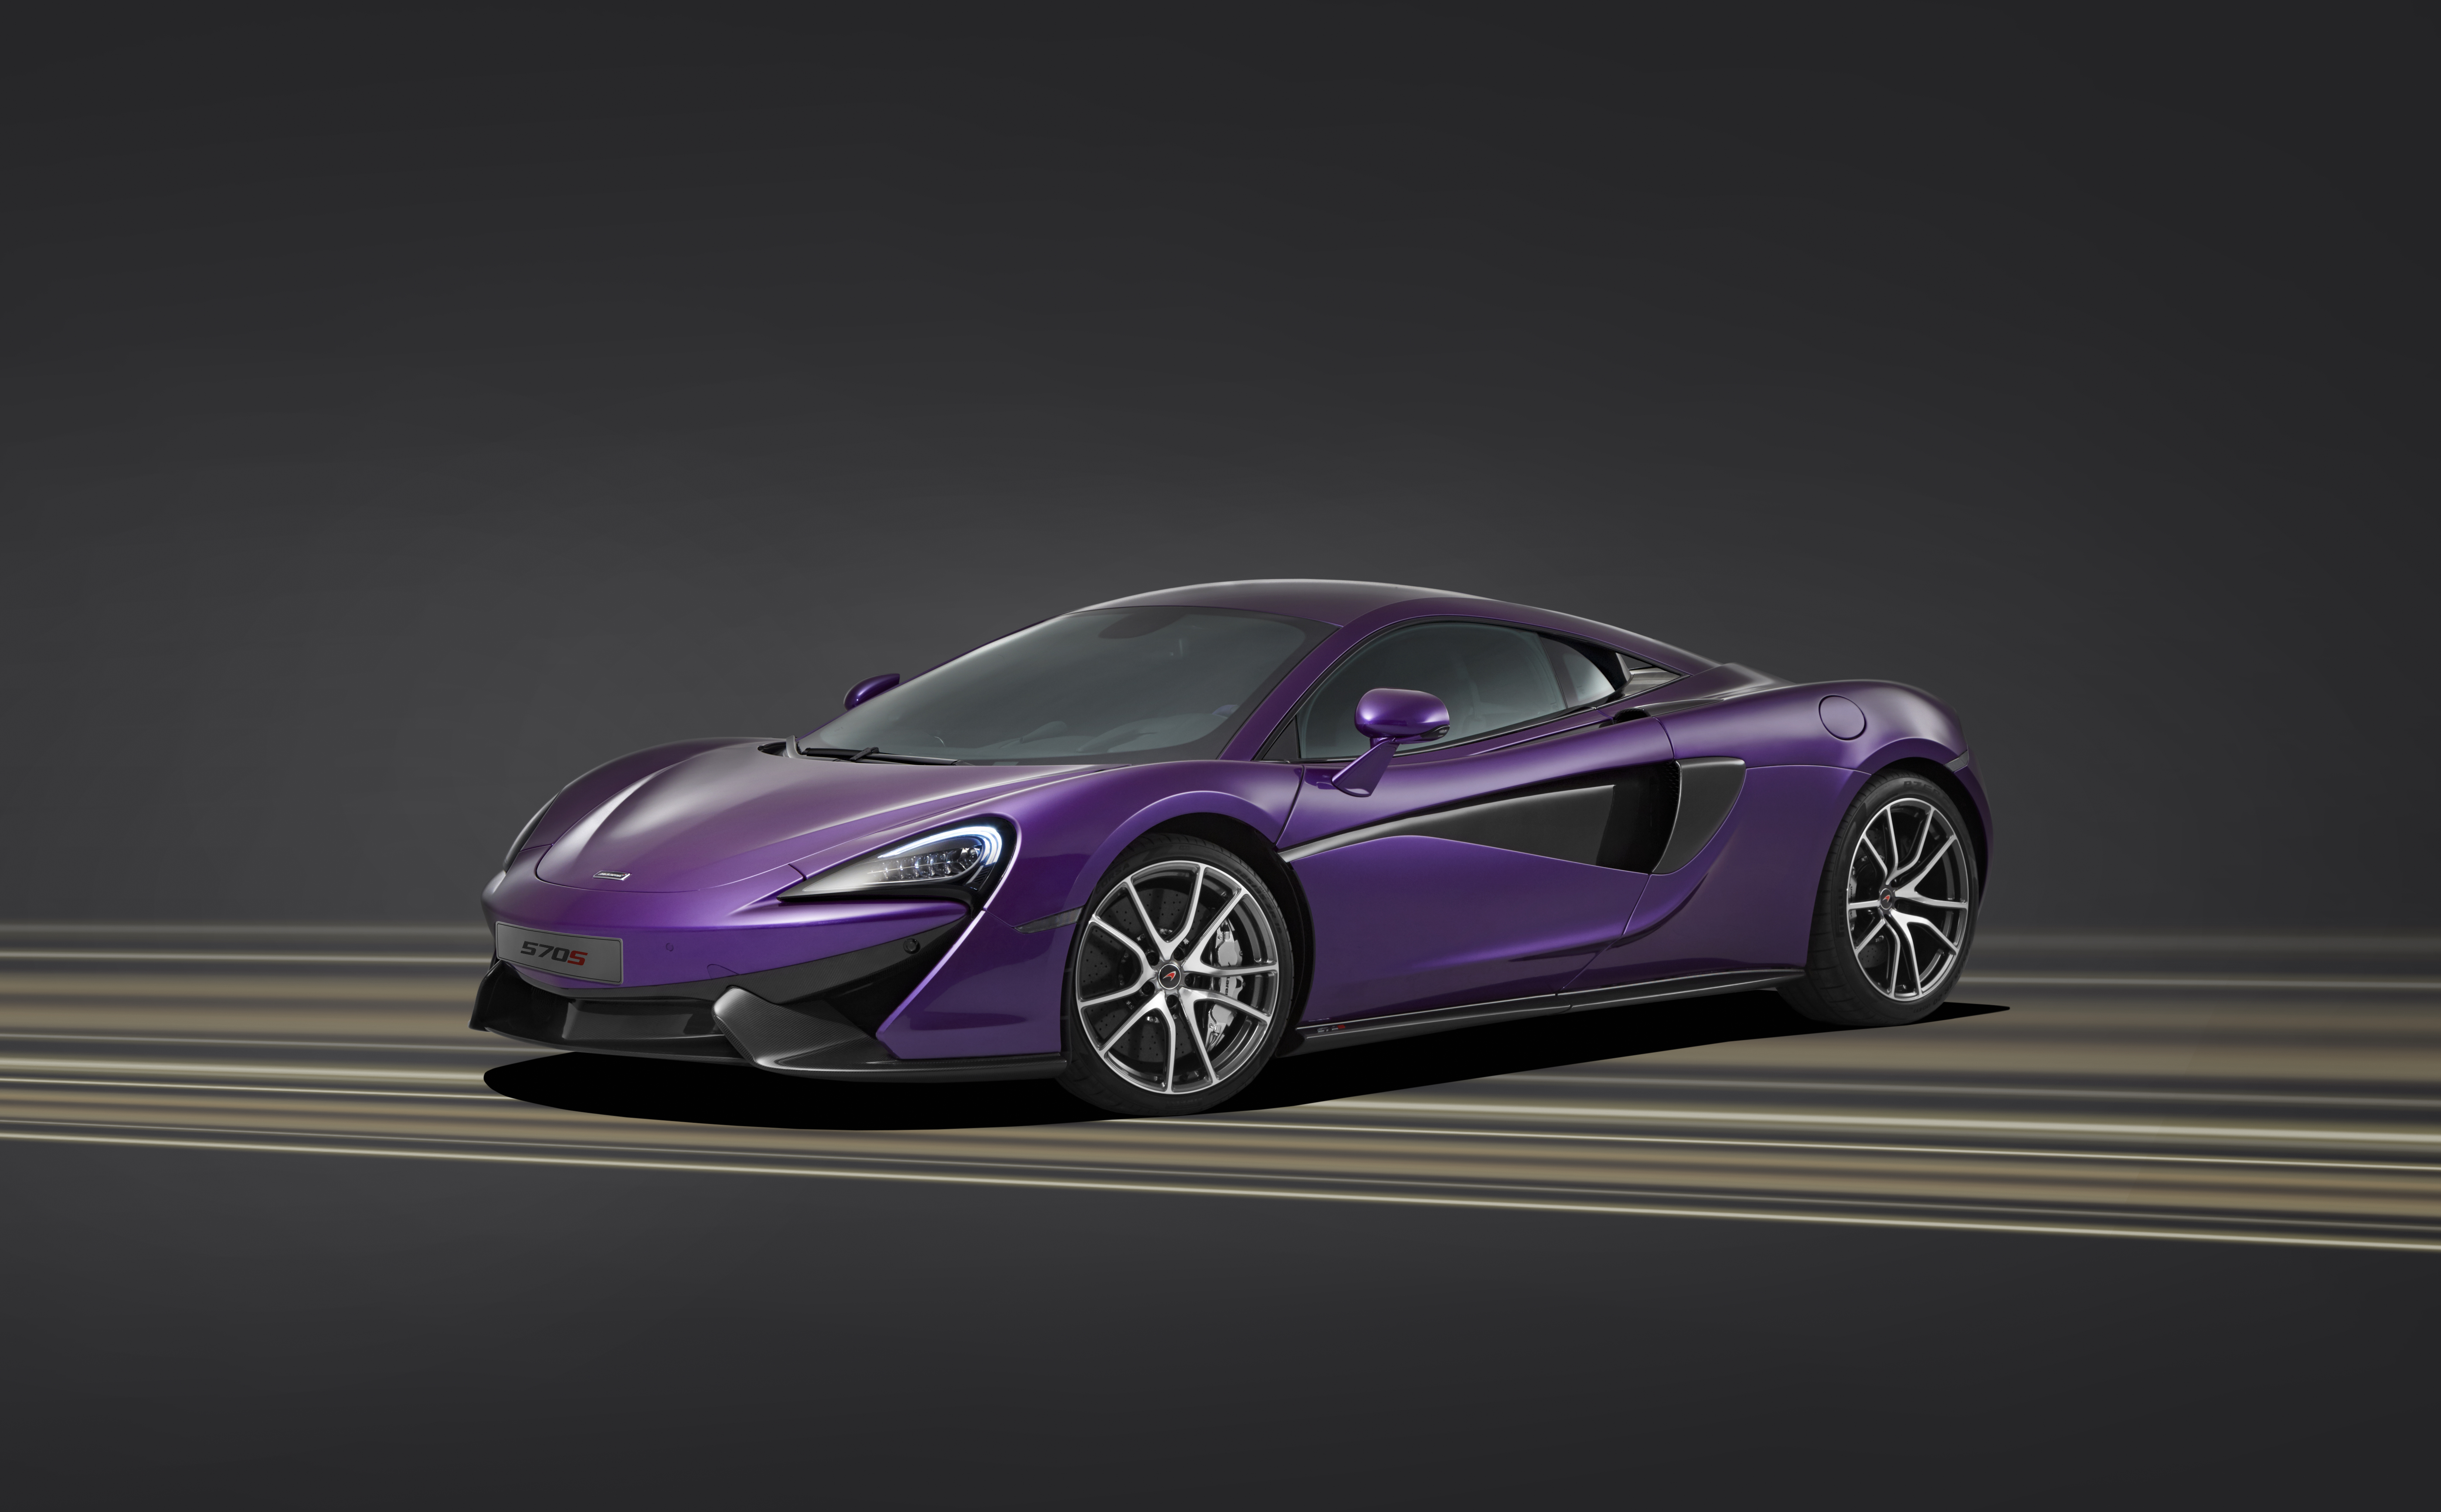 There is nothing more purple than McLaren's 'Mauvine Blue' 570S supercar